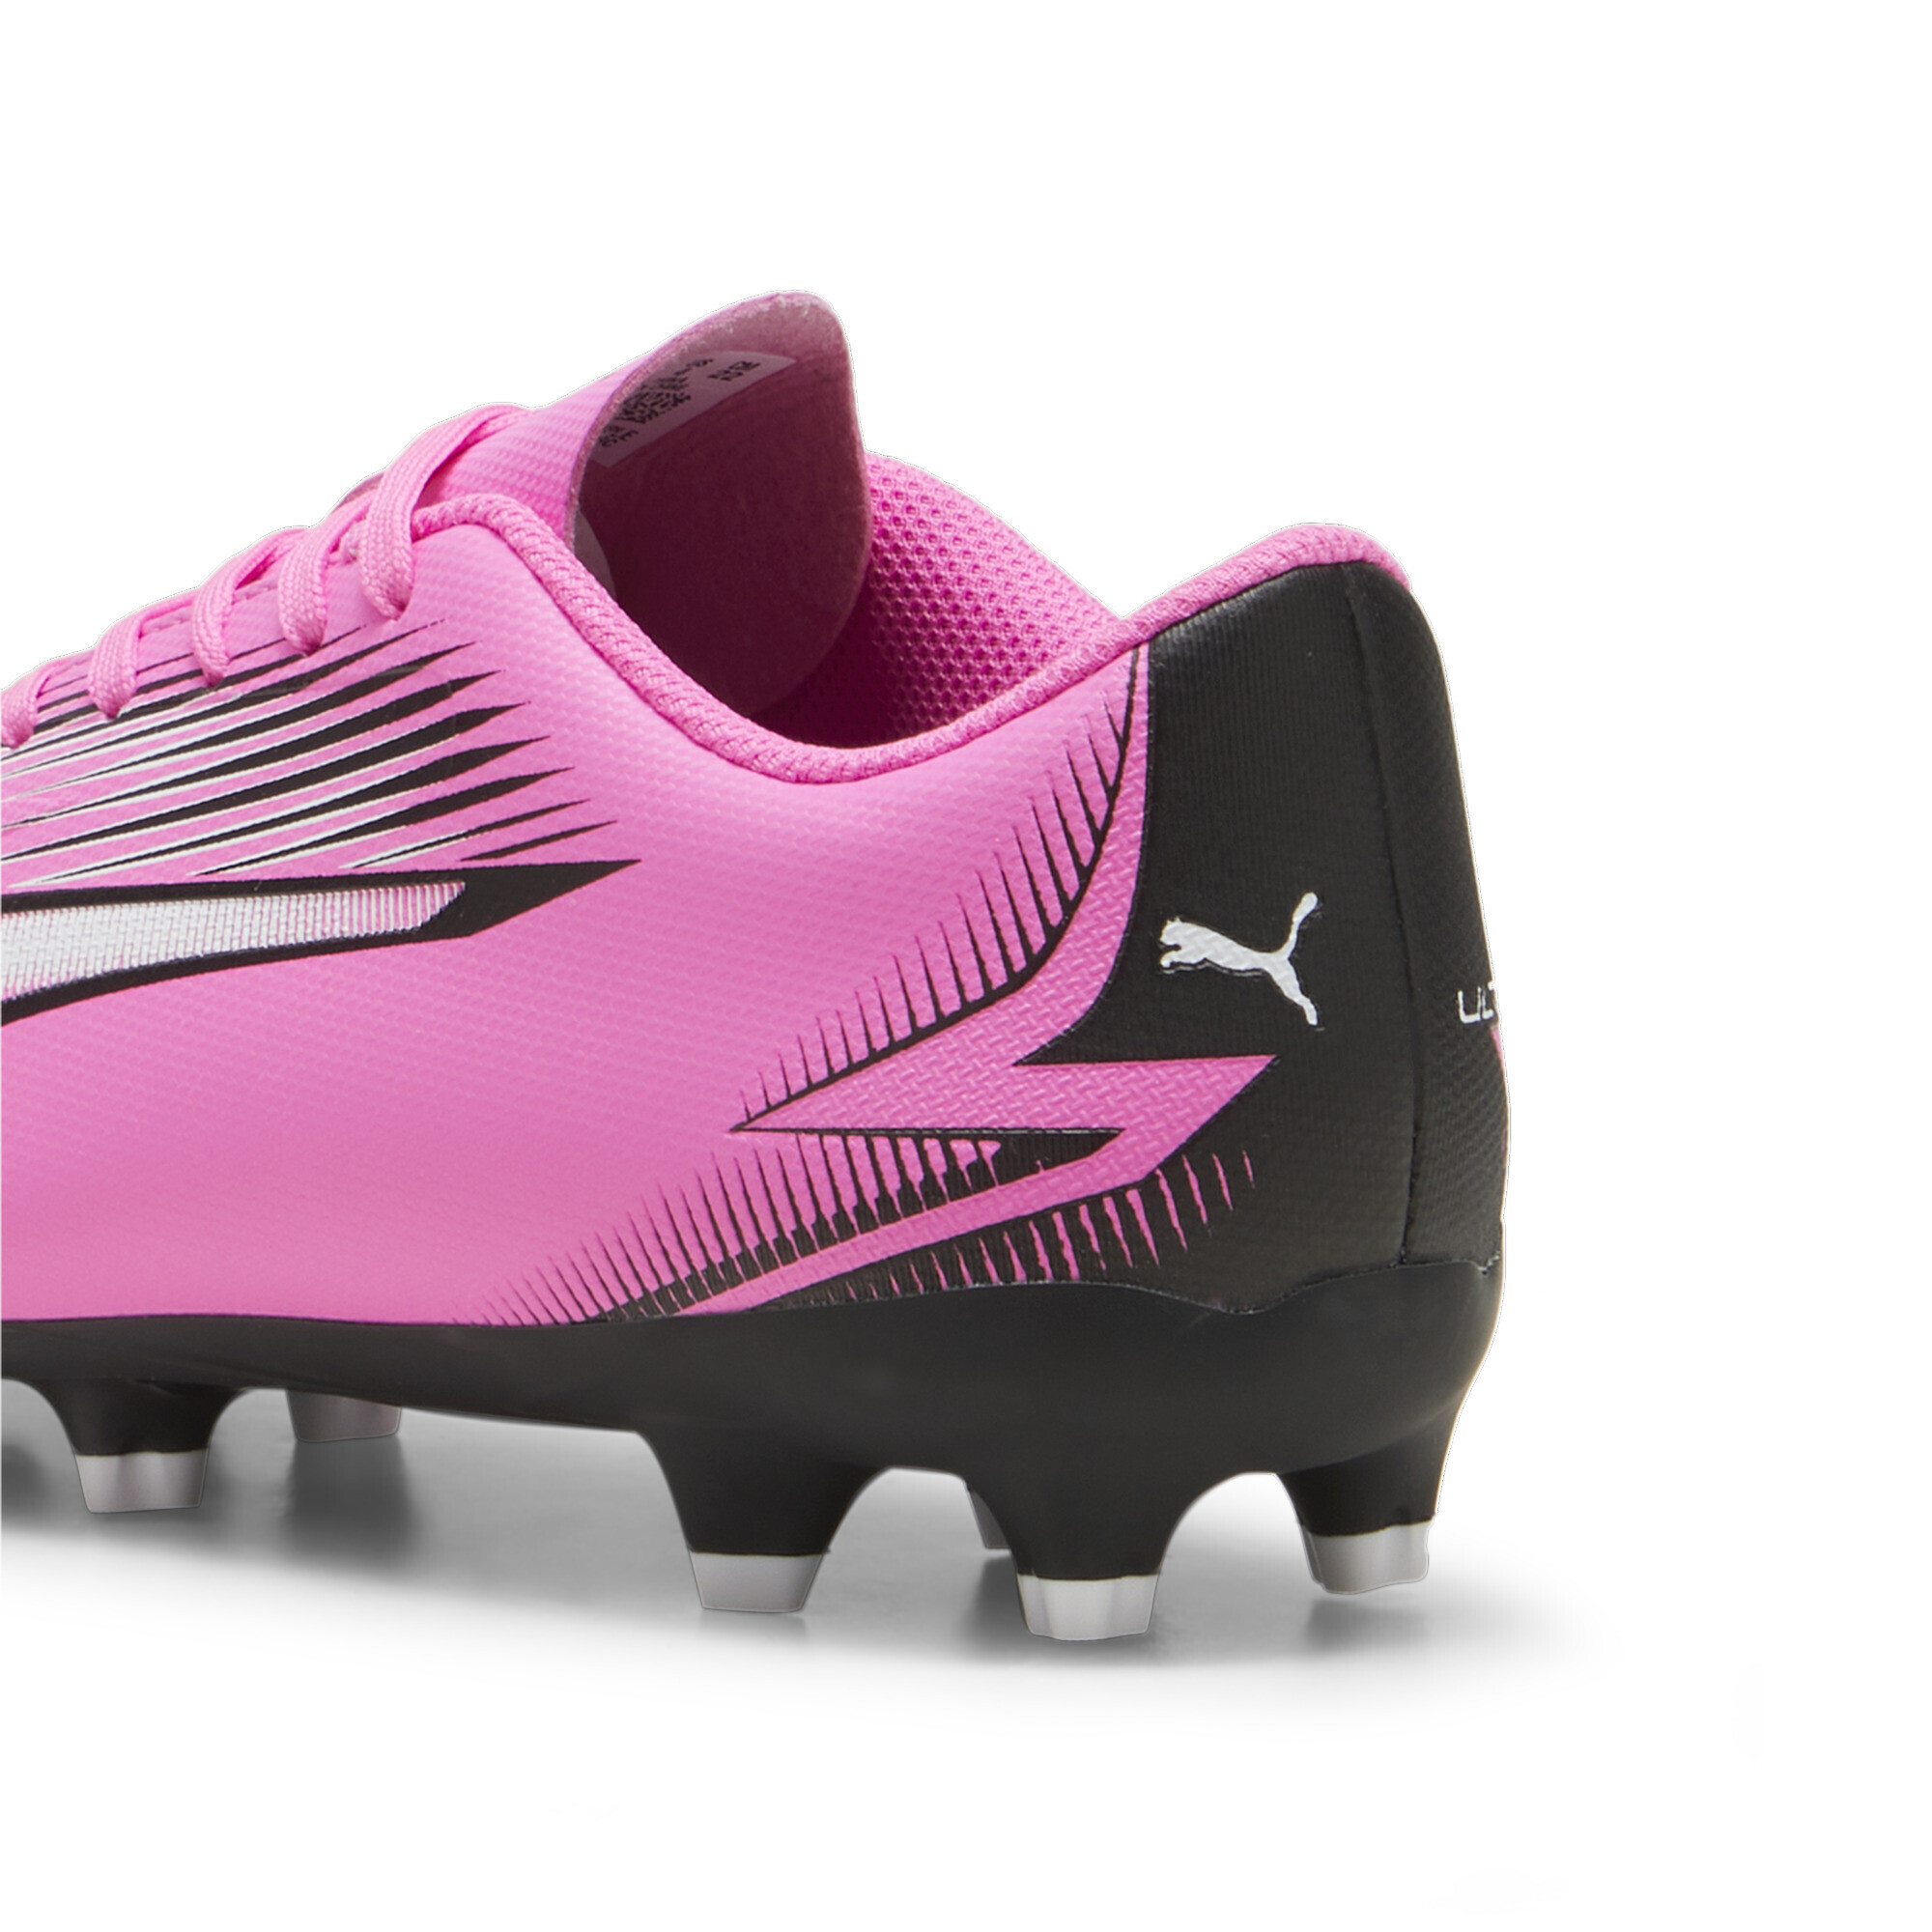 PUMA ULTRA PLAY FG/AG Youth Football Boots In Pink, Size EU 28